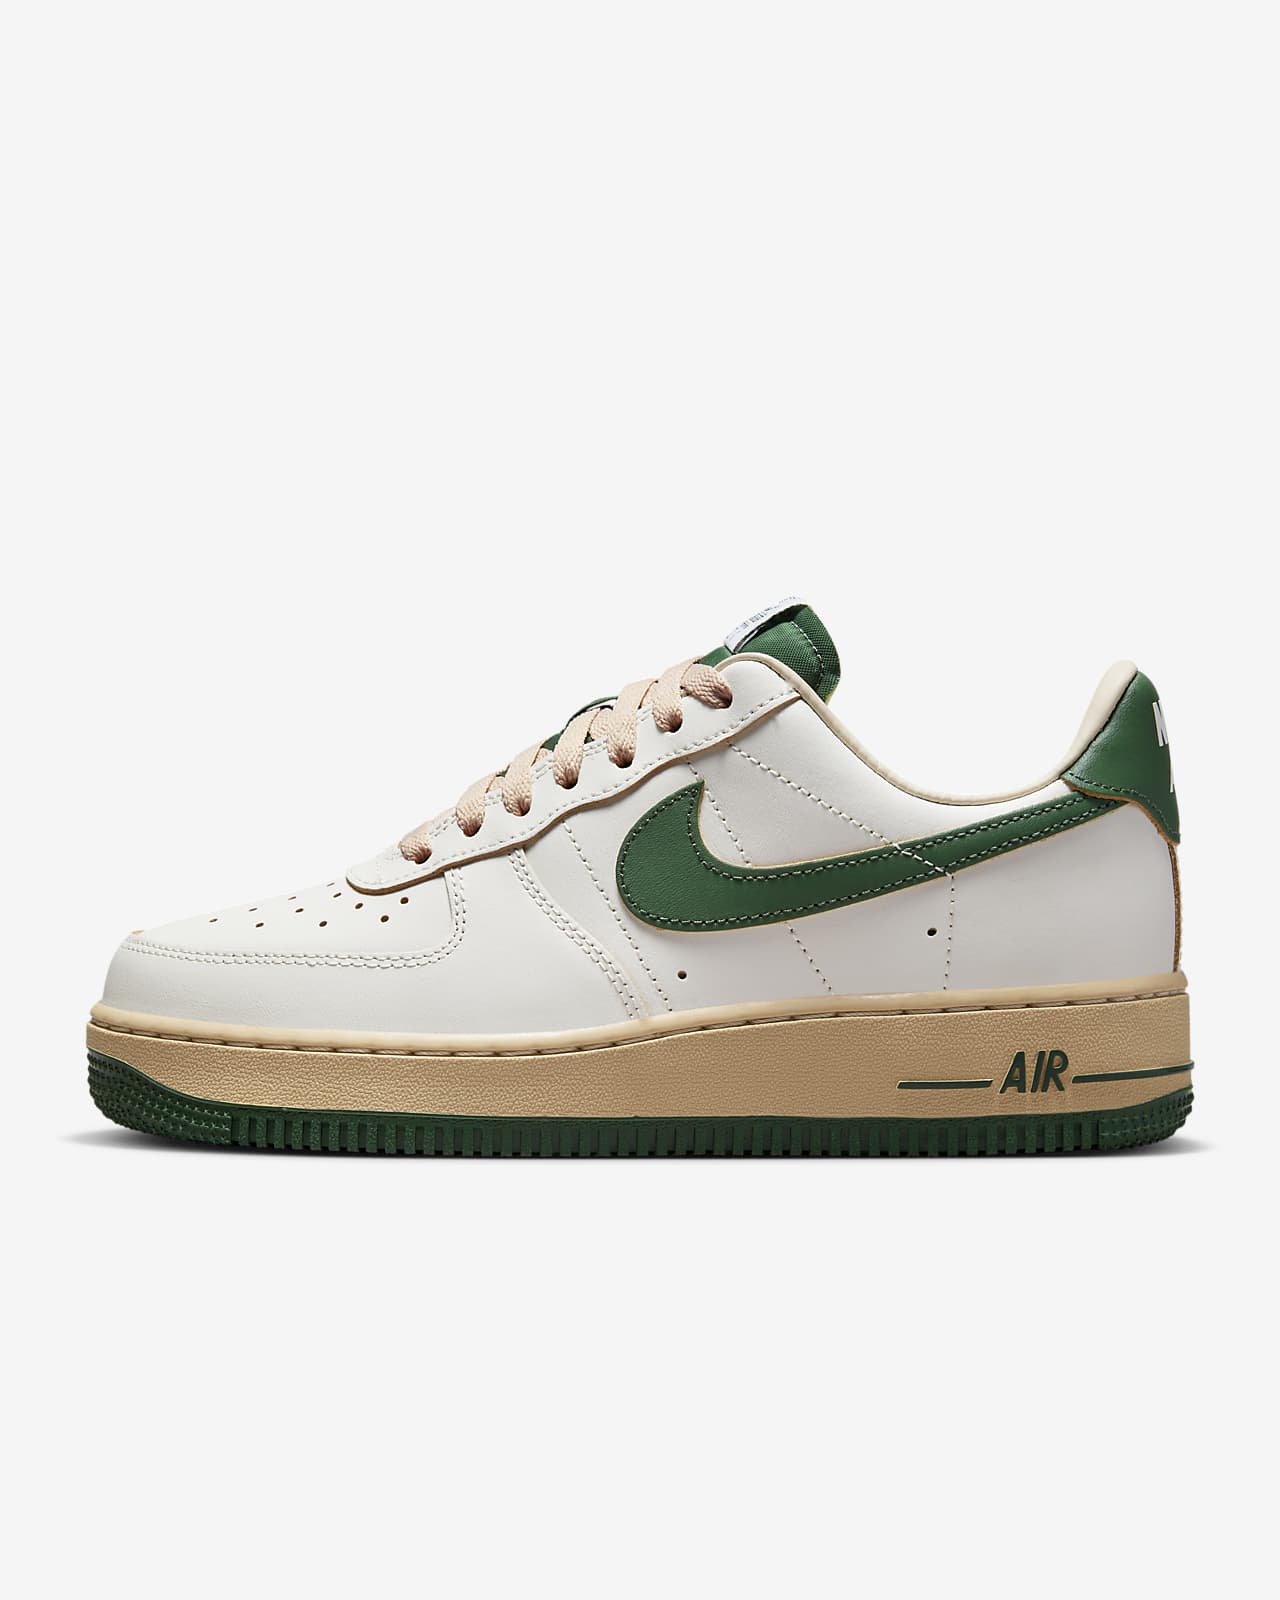 Chaussures Nike Air Force 1 '07 LV8 pour femme. Nike FR